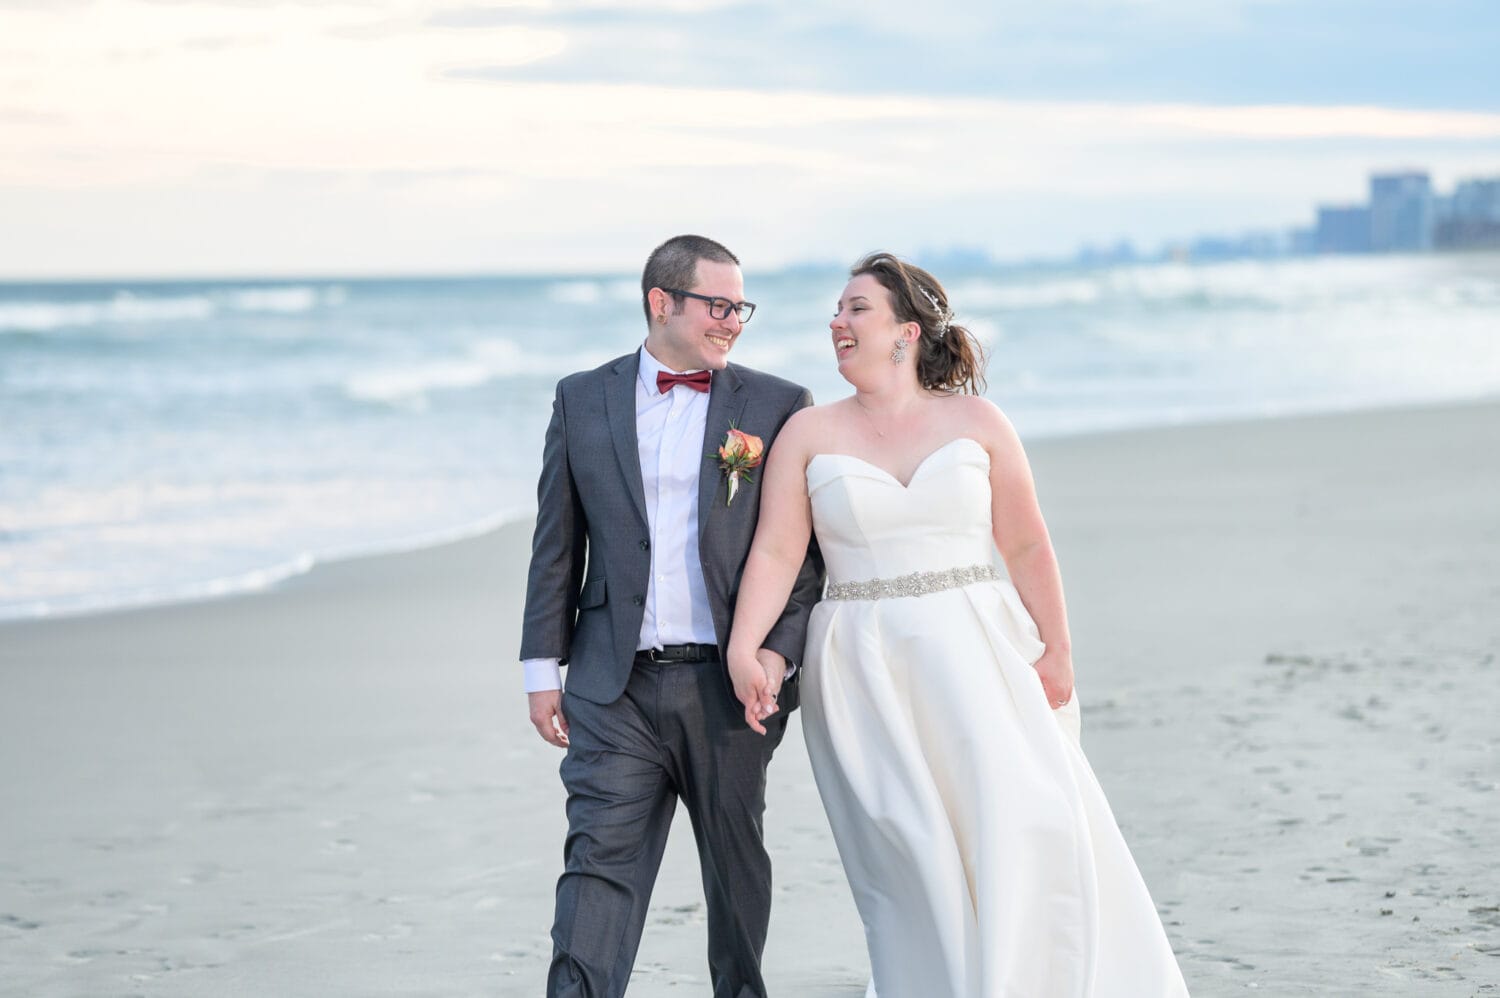 Bride and groom walking by the ocean together  - 21 Main Events at North Beach